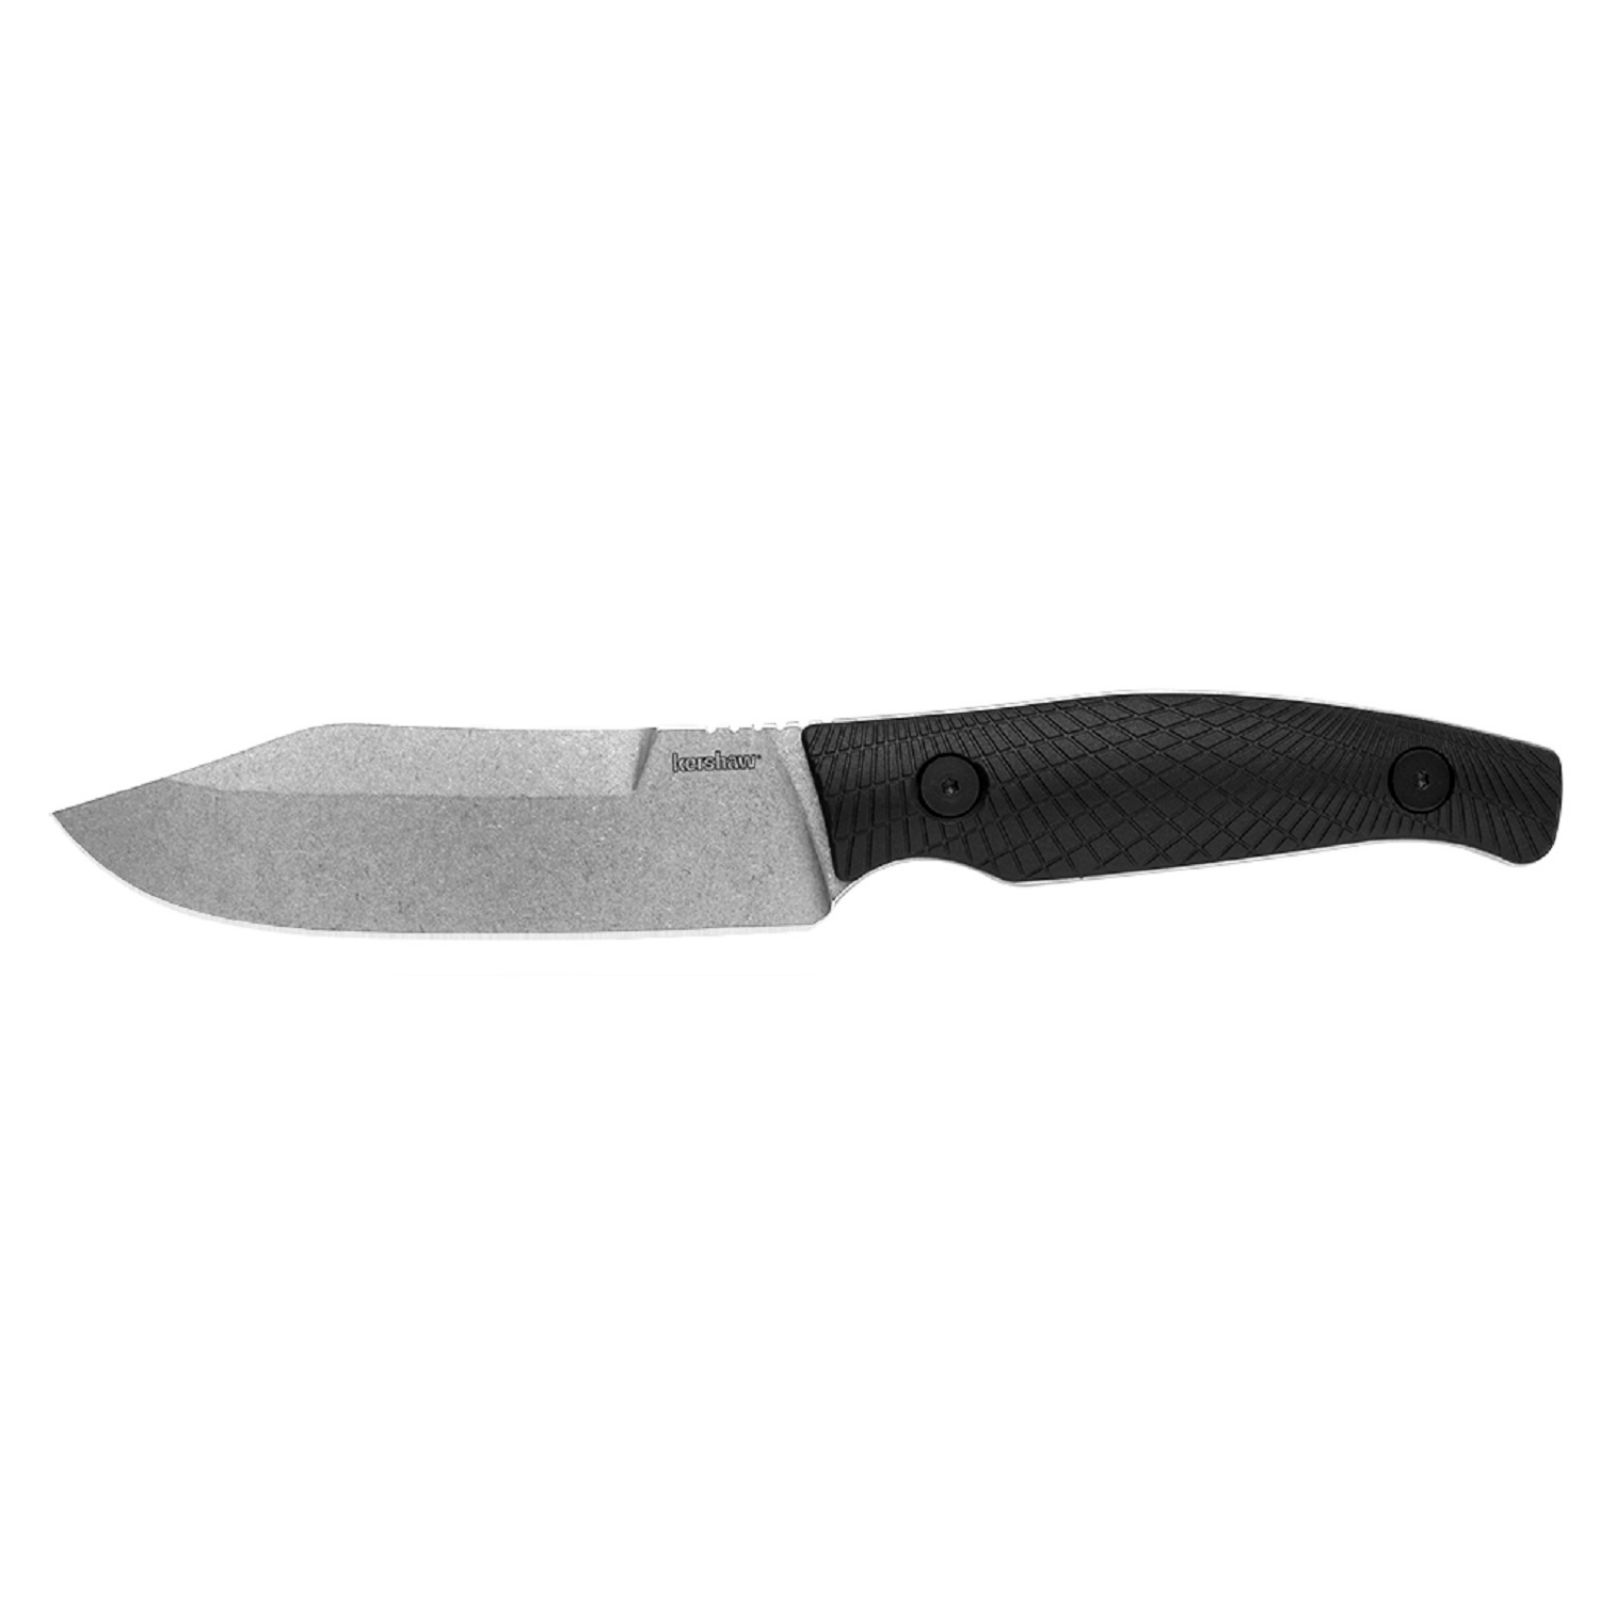 KERSHAW Camp 5 Fixed Blade Knife Black Nylon Full Tang D2 Carbon Steel 1083 Knives